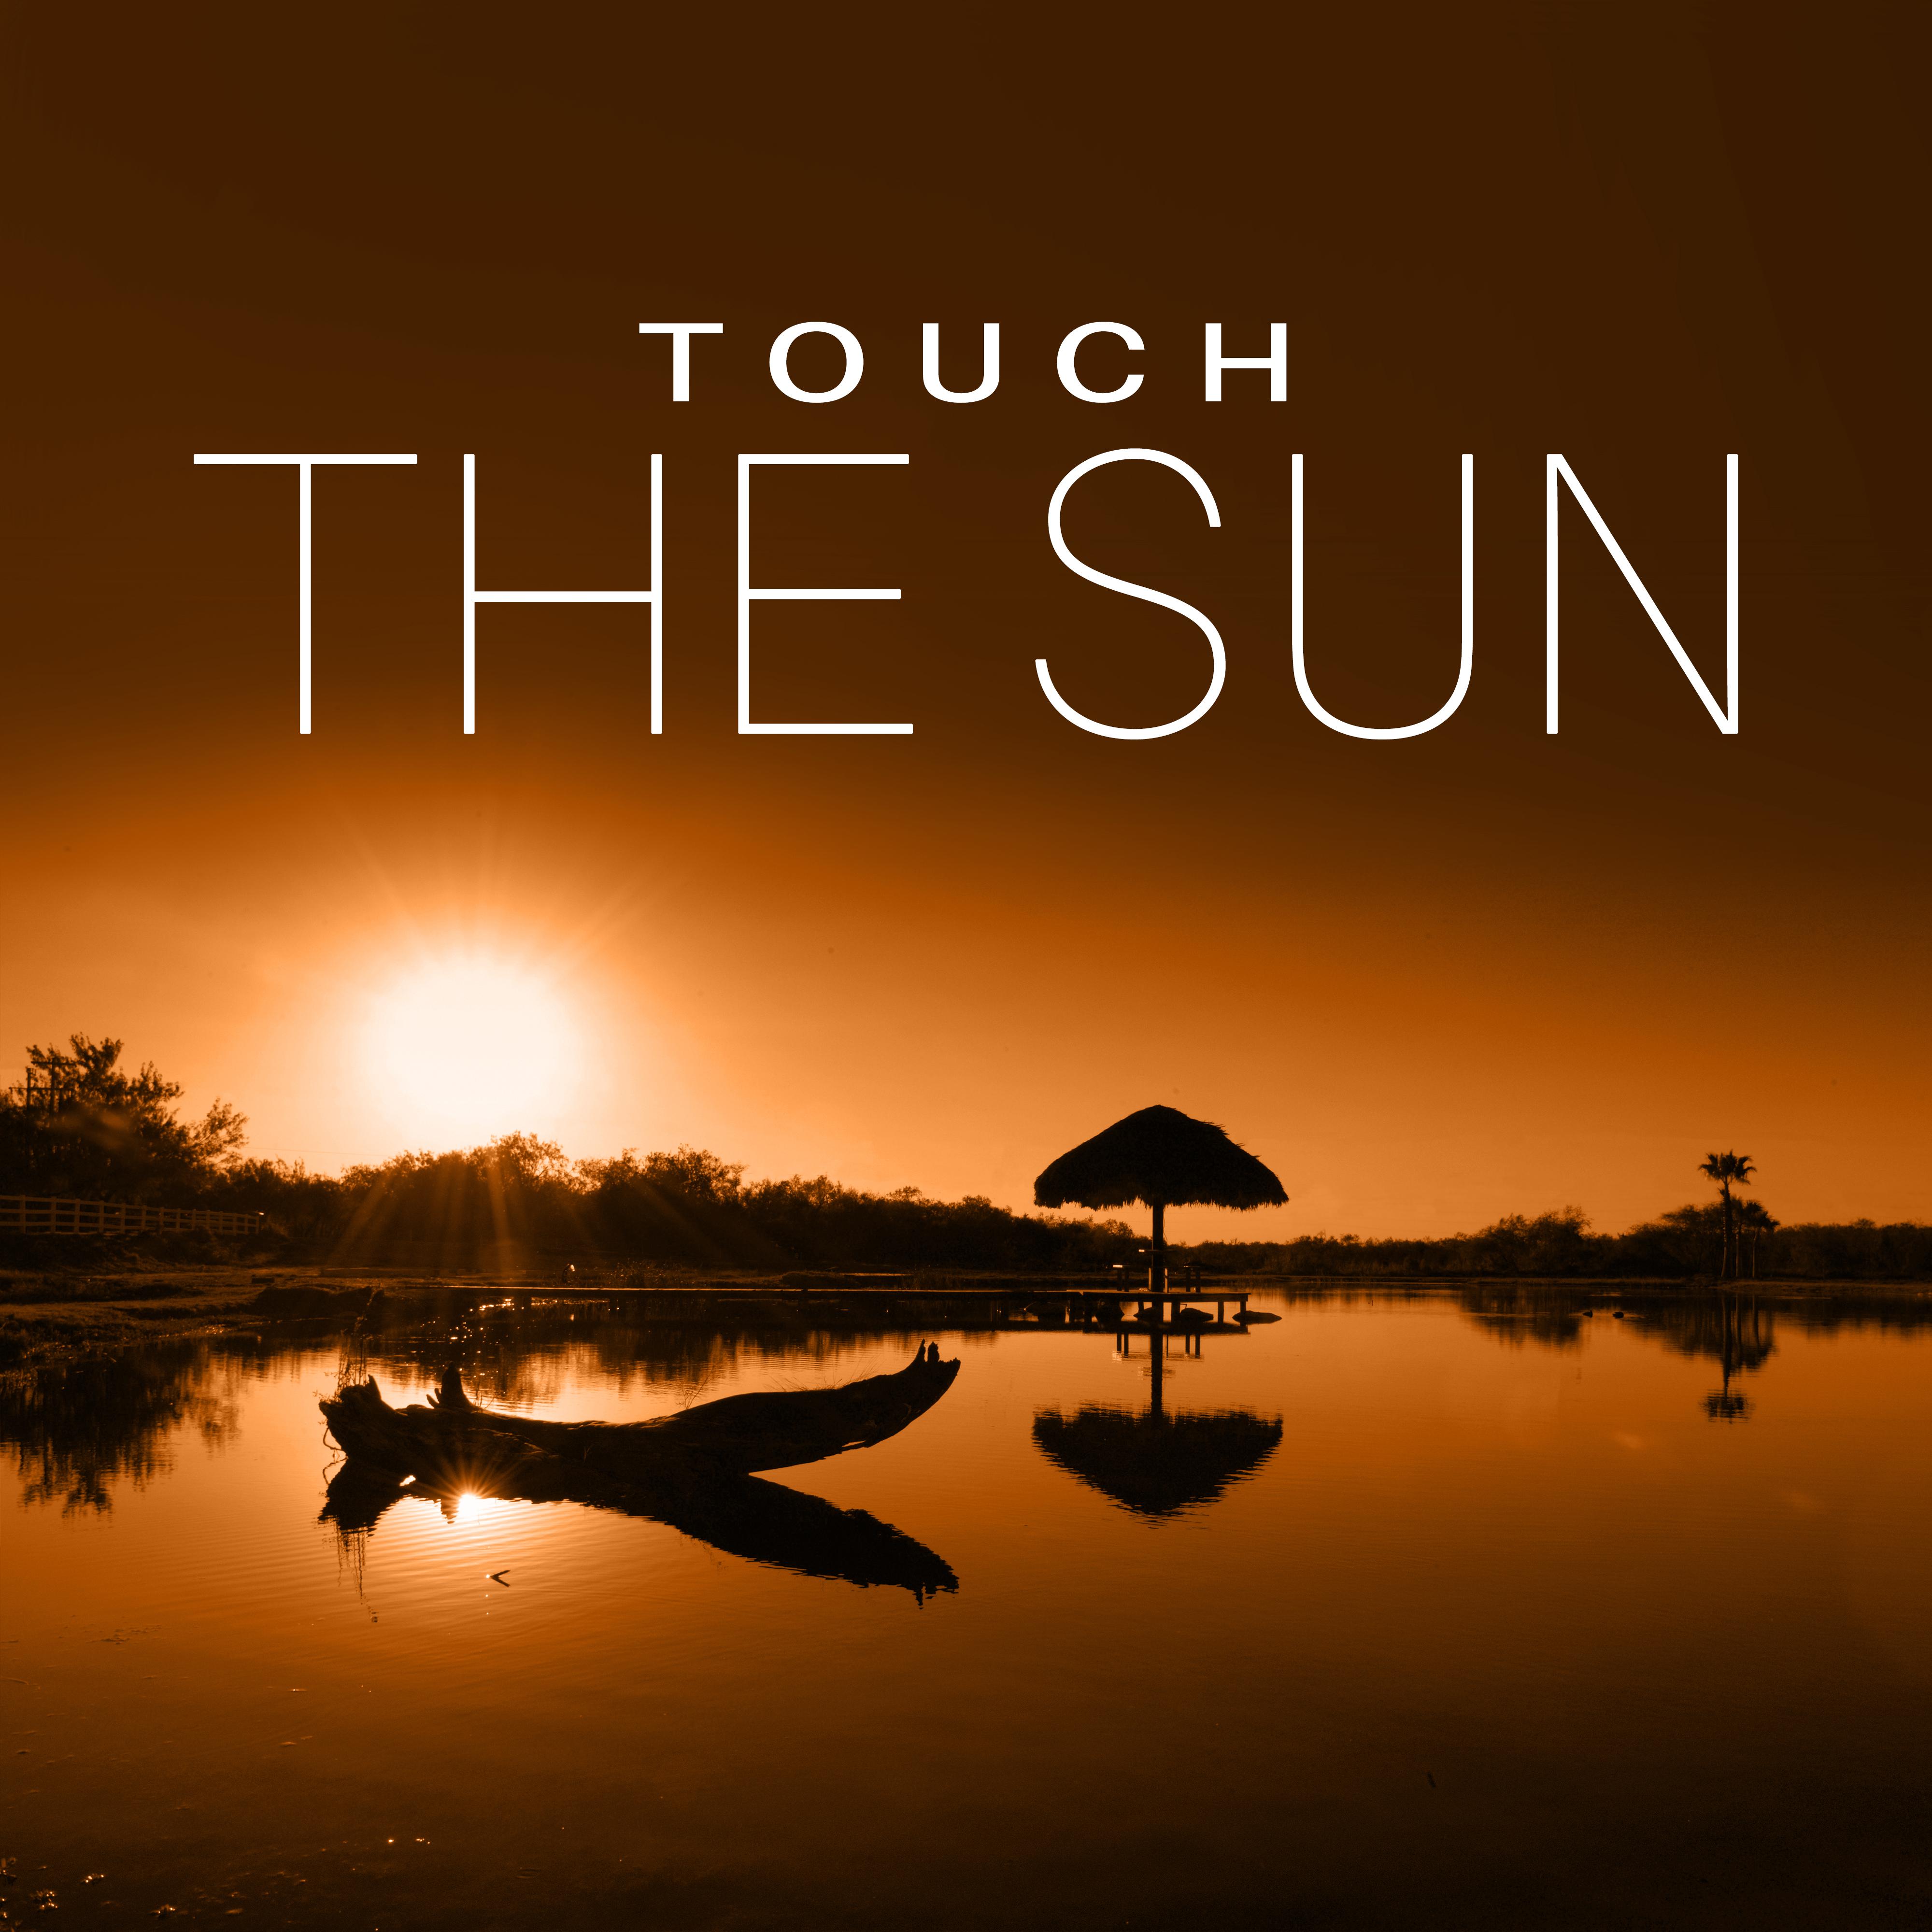 Touch the Sun  Beautiful Beach, Relaxation, Summer Vibes, Ambient Music, Palma de Lounge, Summer Dreams